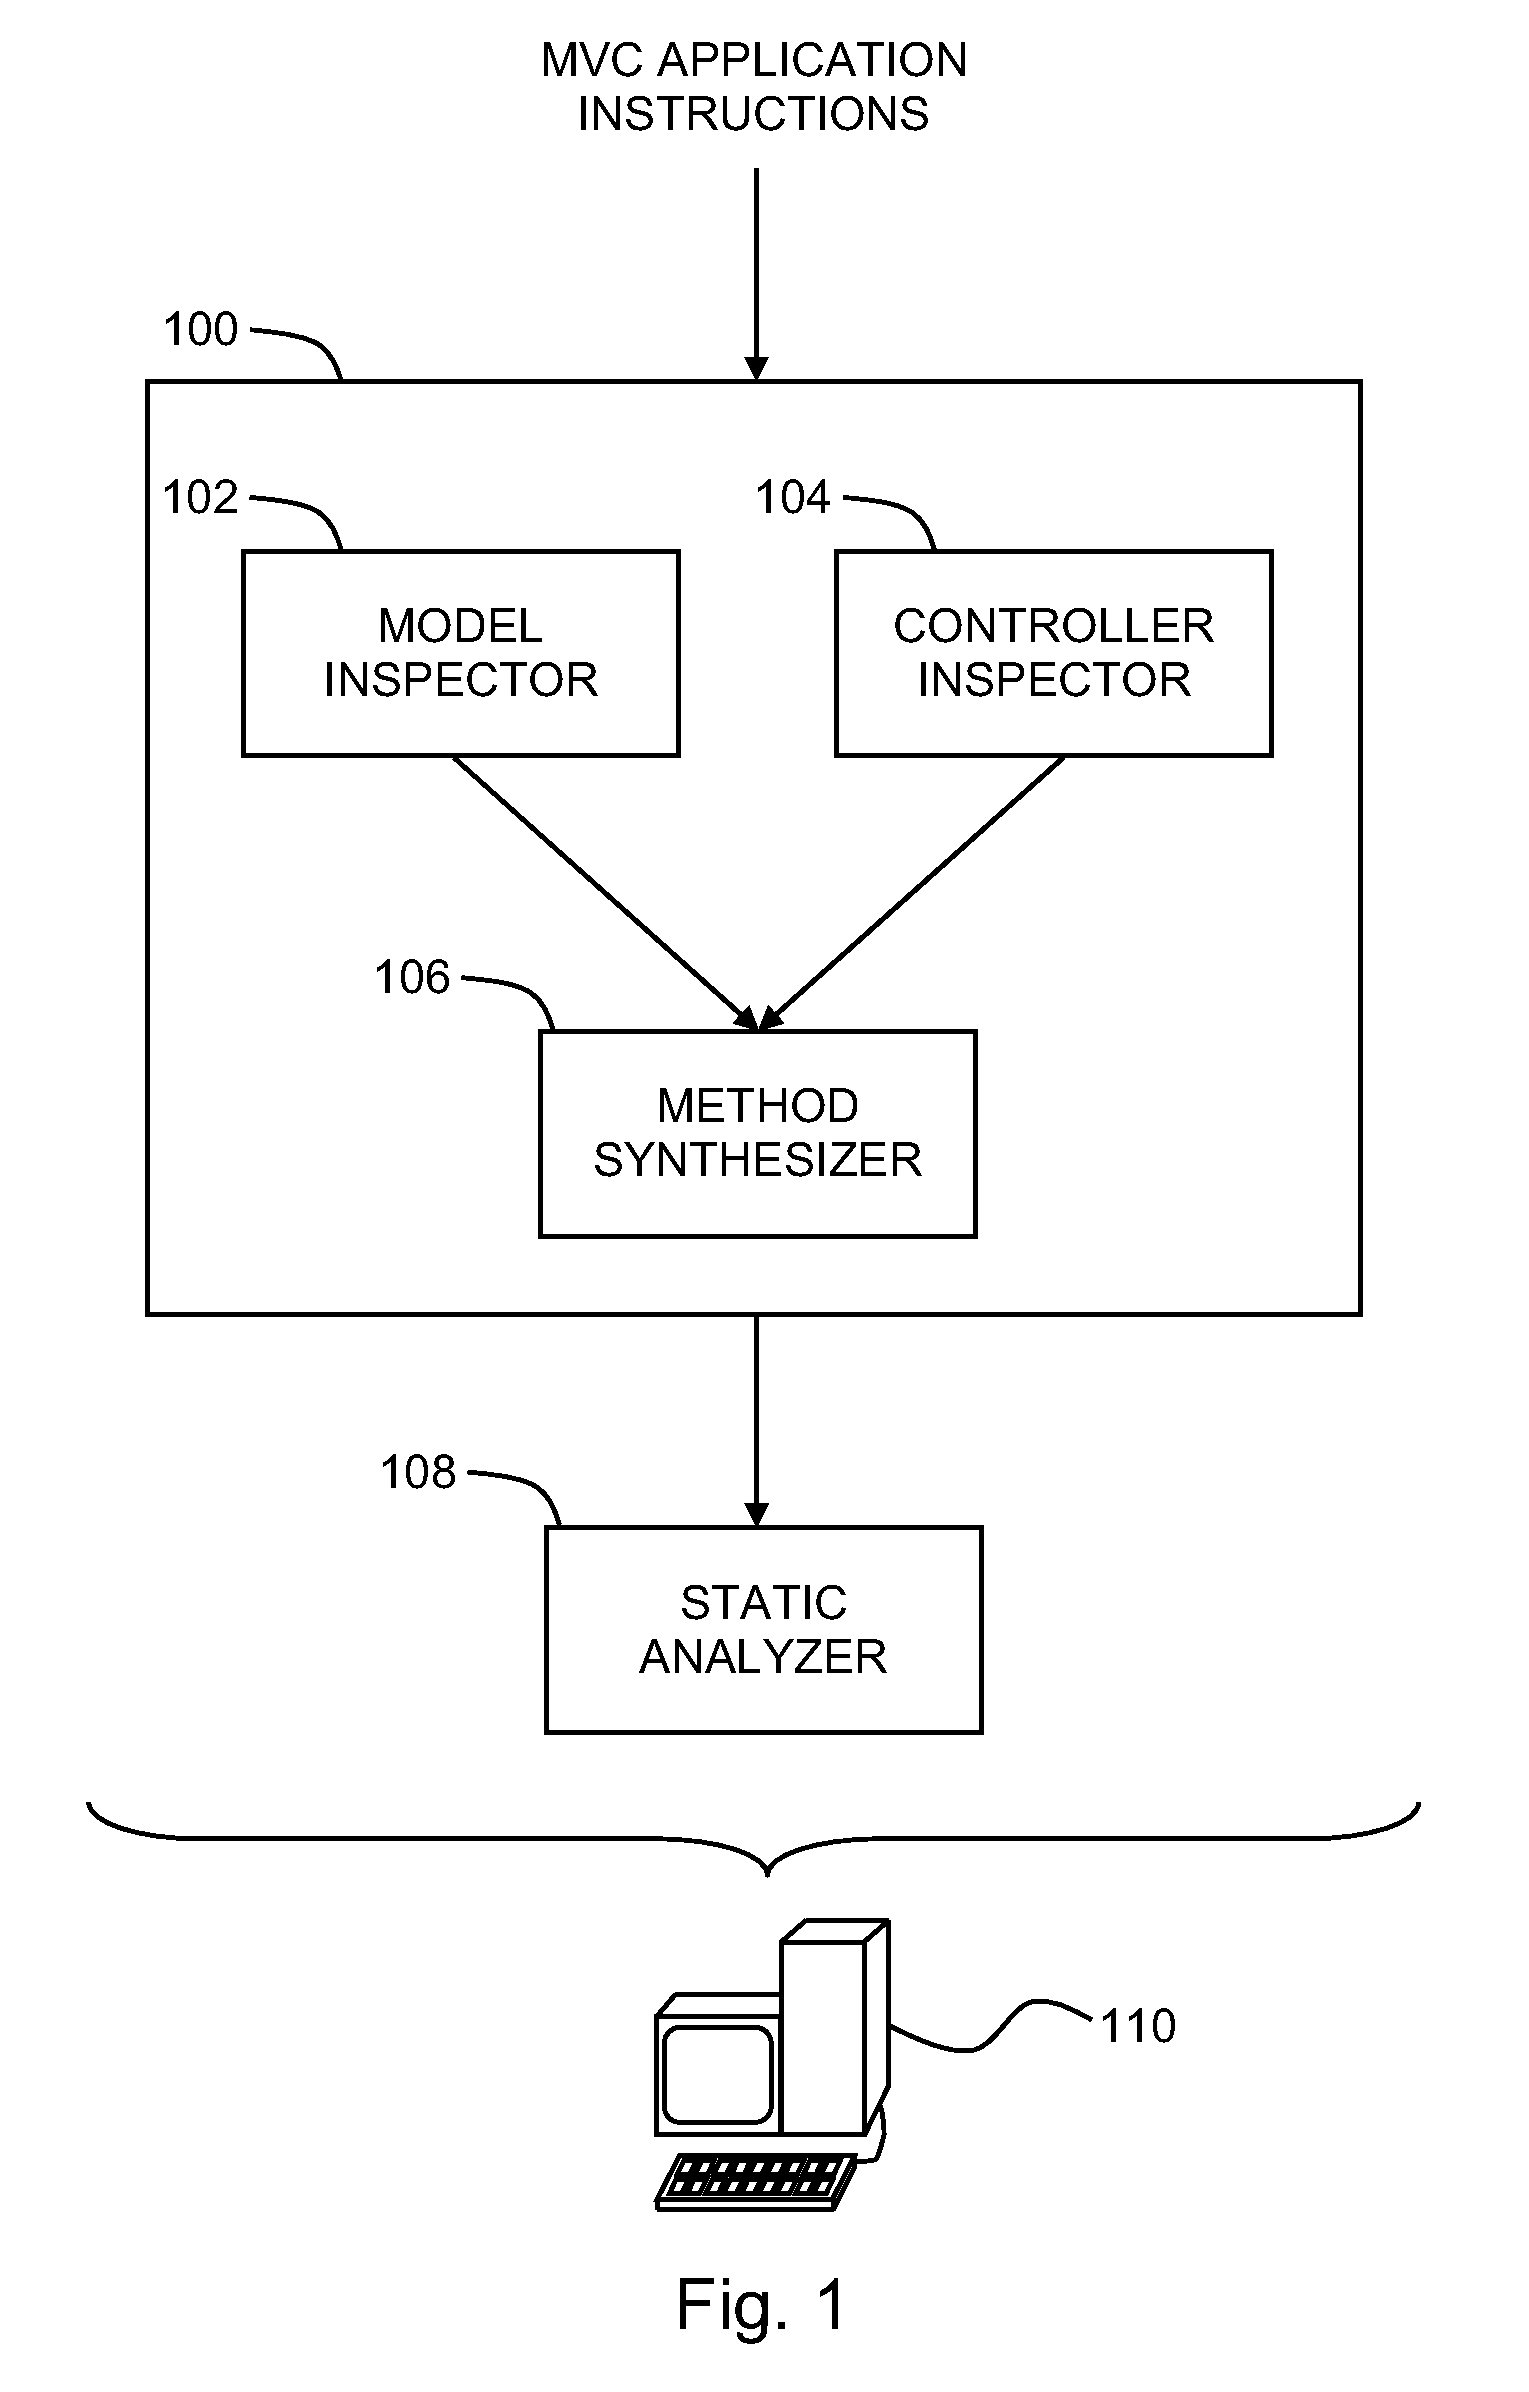 Static Analysis of Computer Software Applications Having A Model-View-Controller Architecture